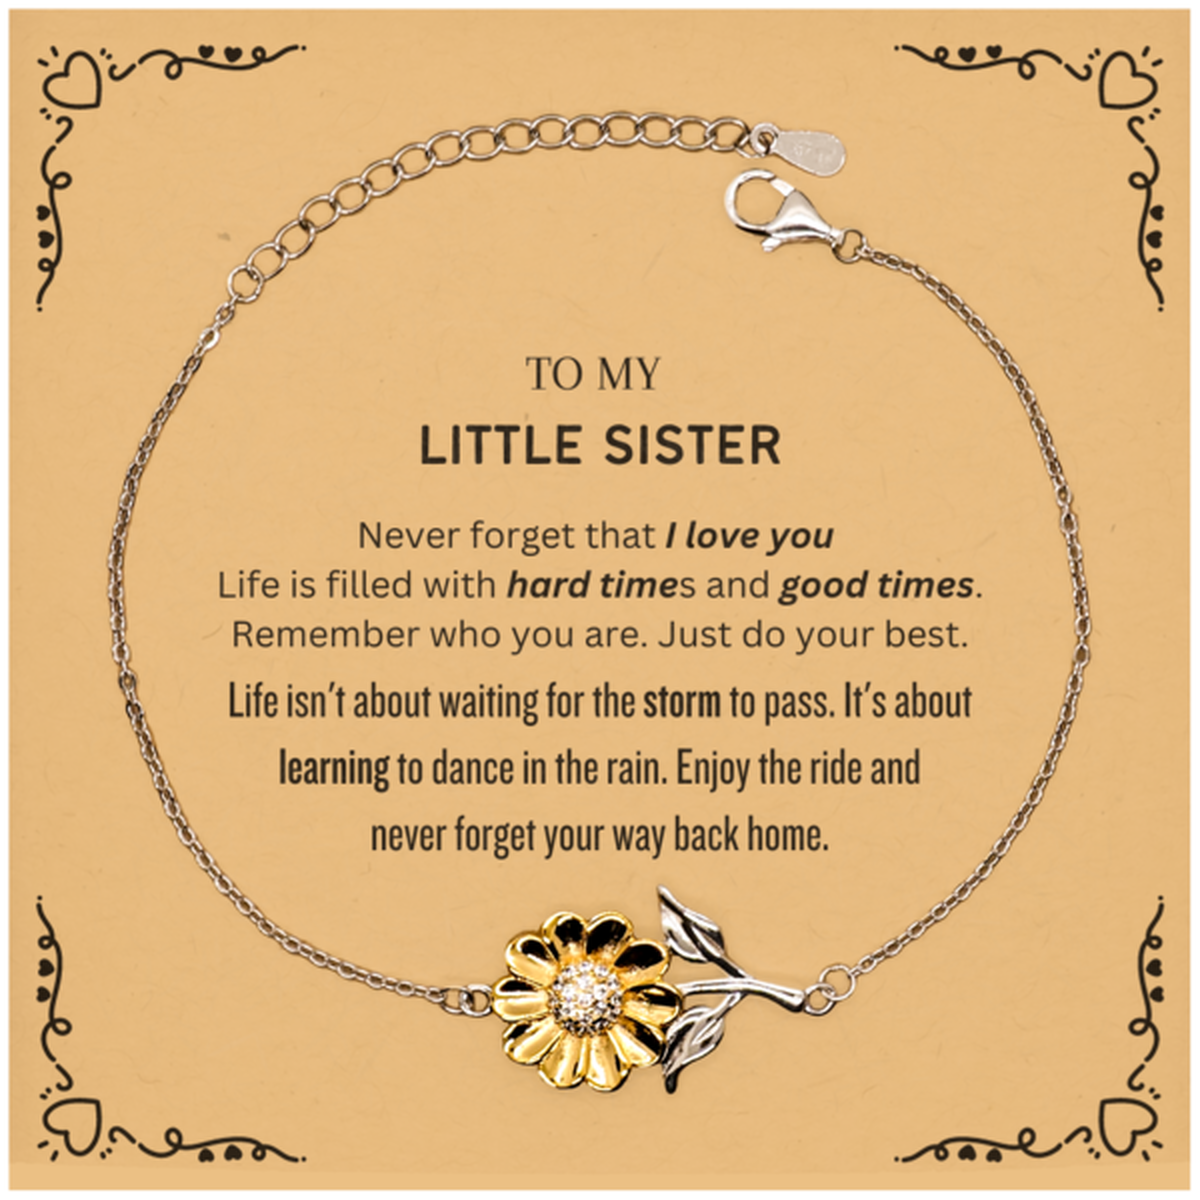 20 Gifts for Your Little Sister (Who's Not Little Anymore) | Little sister  gifts, Birthday gifts for sister, Christmas gift inspiration